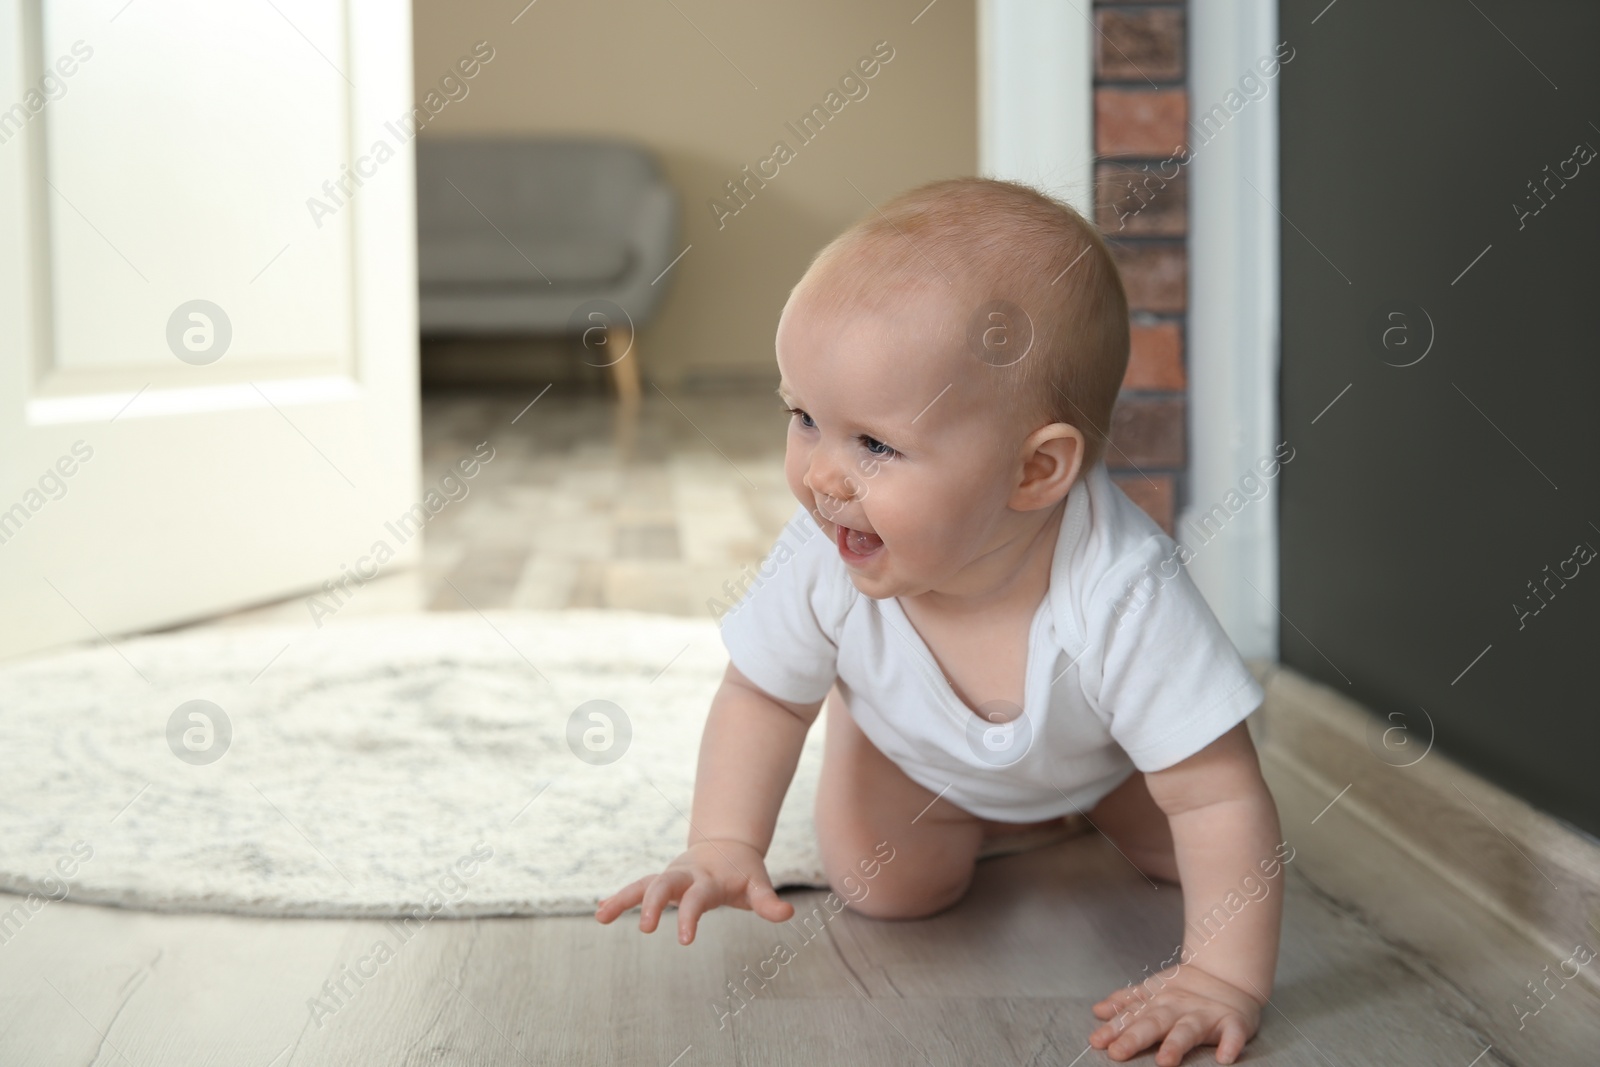 Photo of Cute little baby crawling on floor indoors, space for text